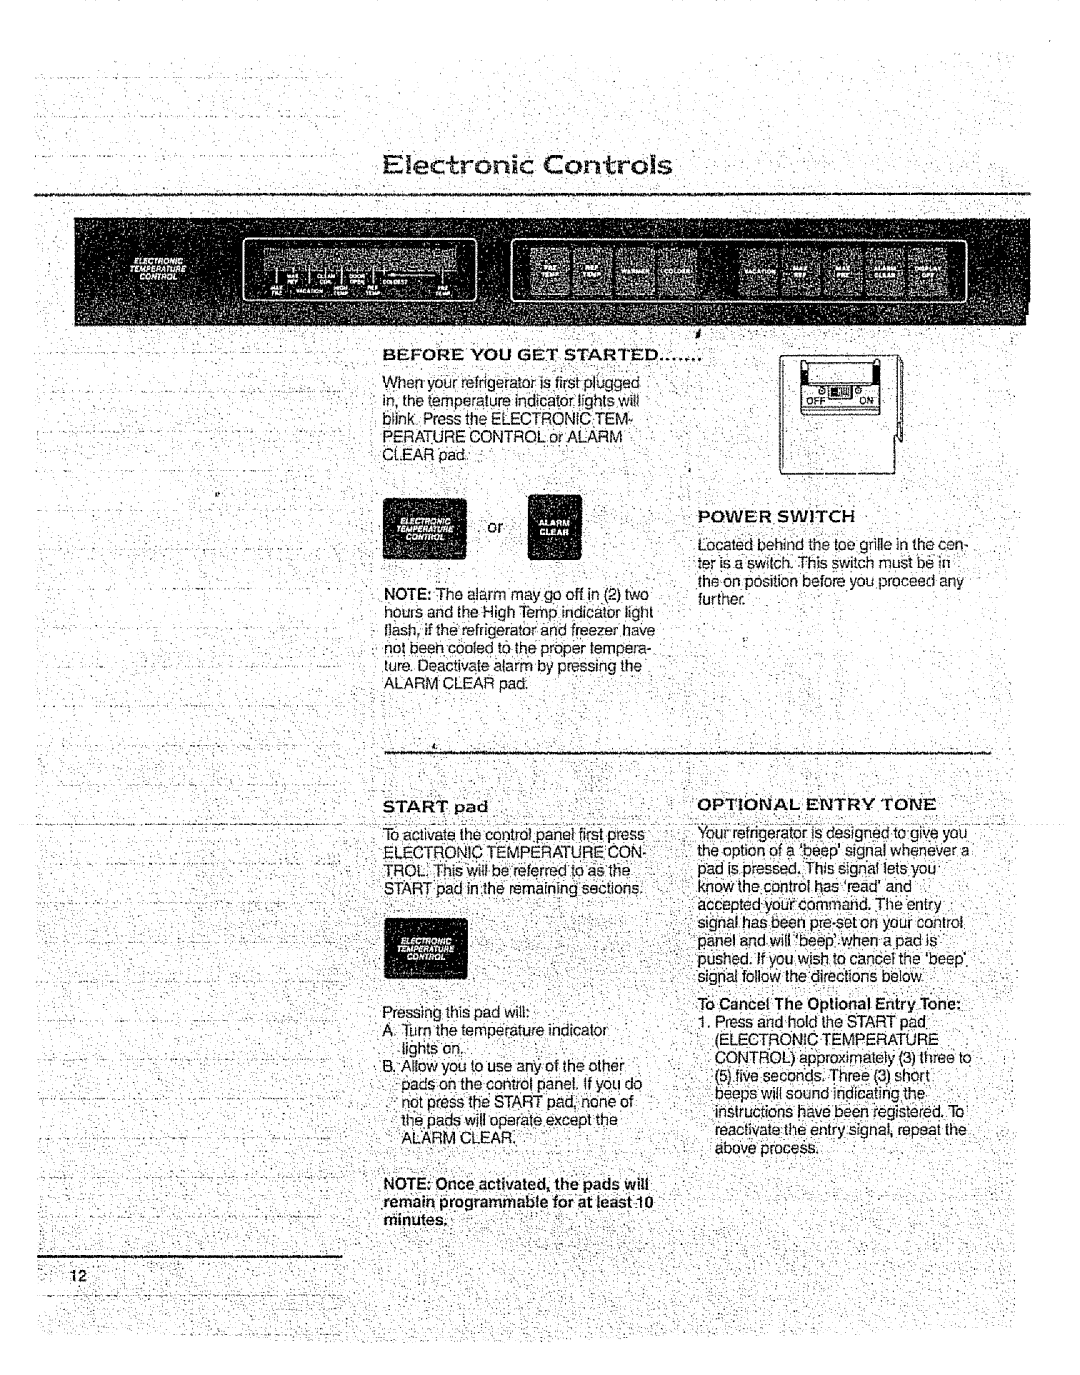 Sears 10062603 manual in, the temperature ir d cato lights,wlii, t tink.P esstile ELECTRONIC.TEM, Power, Switch 